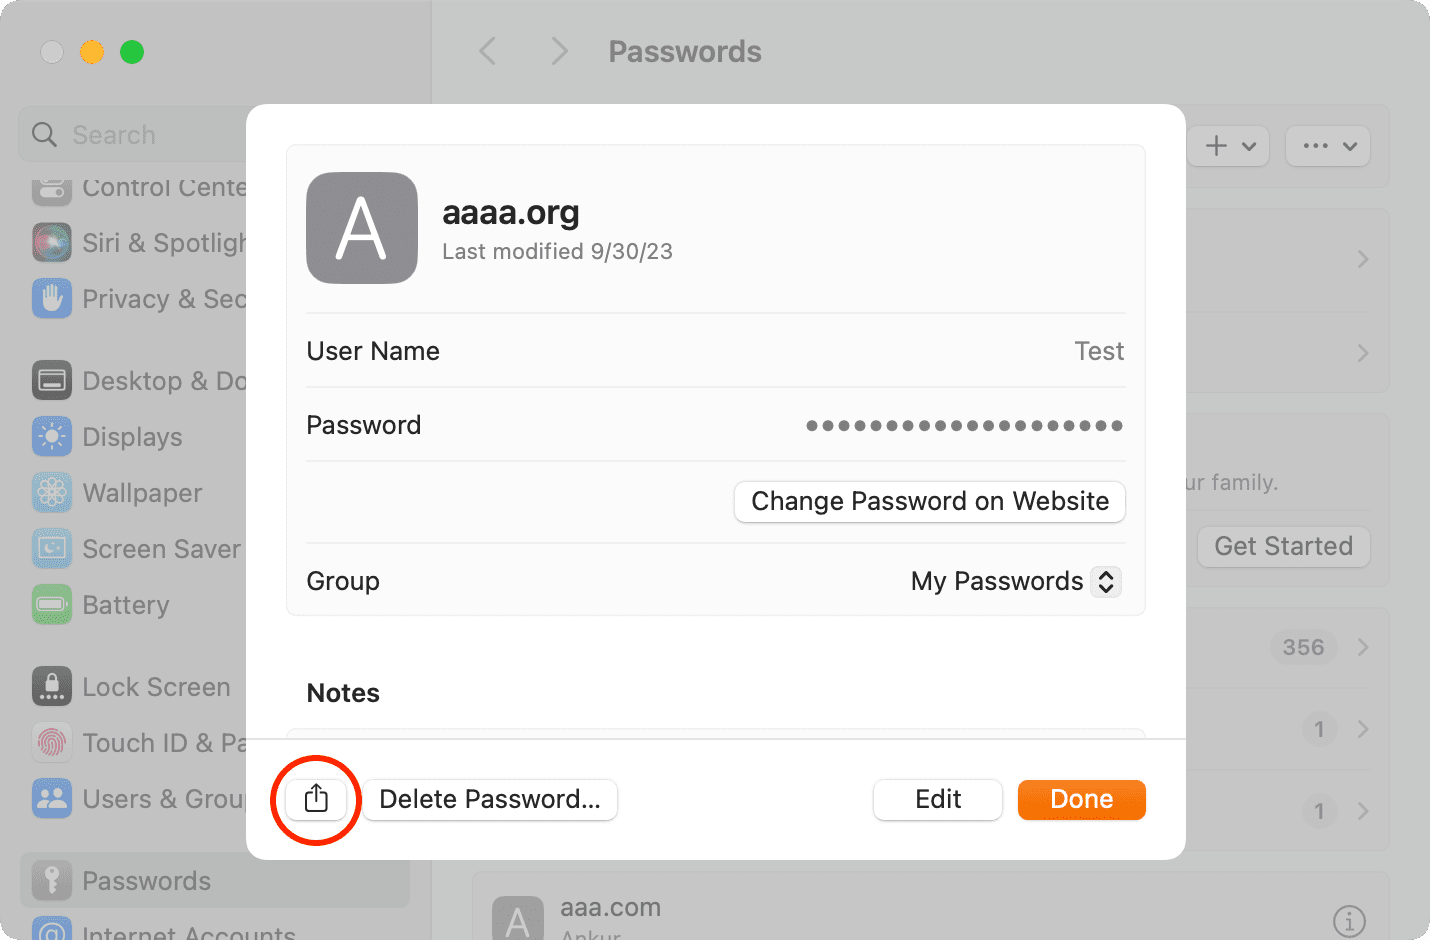 Share password using AirDrop from Mac